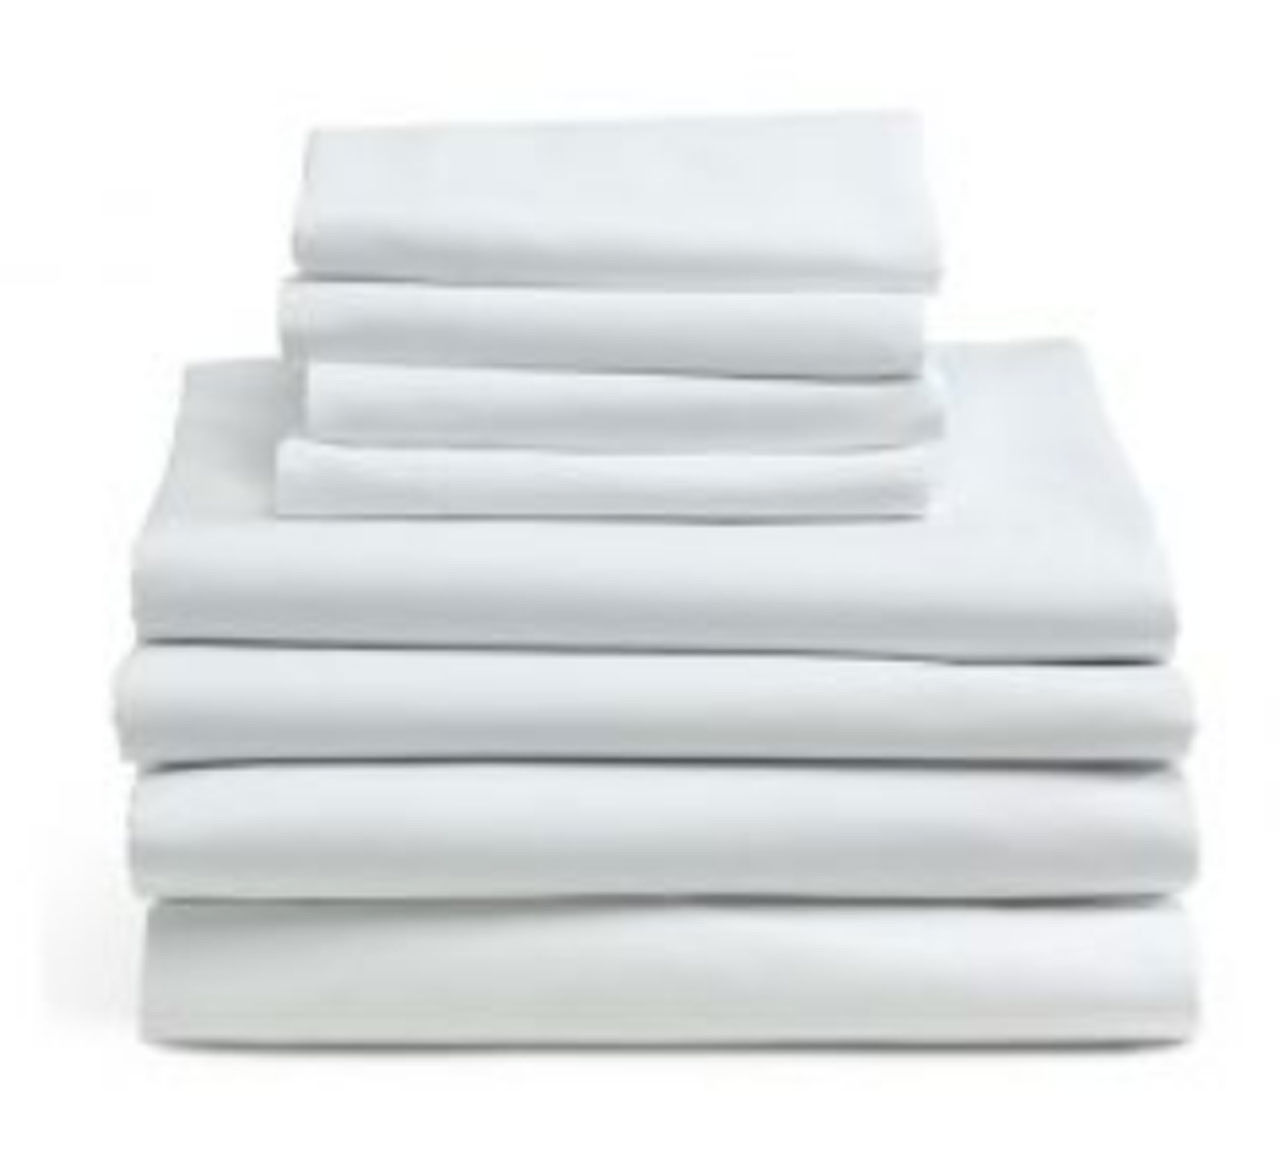 Do the Royal Star T-180 Hospitality Bed Sheets from royal star wholesale need ironing?